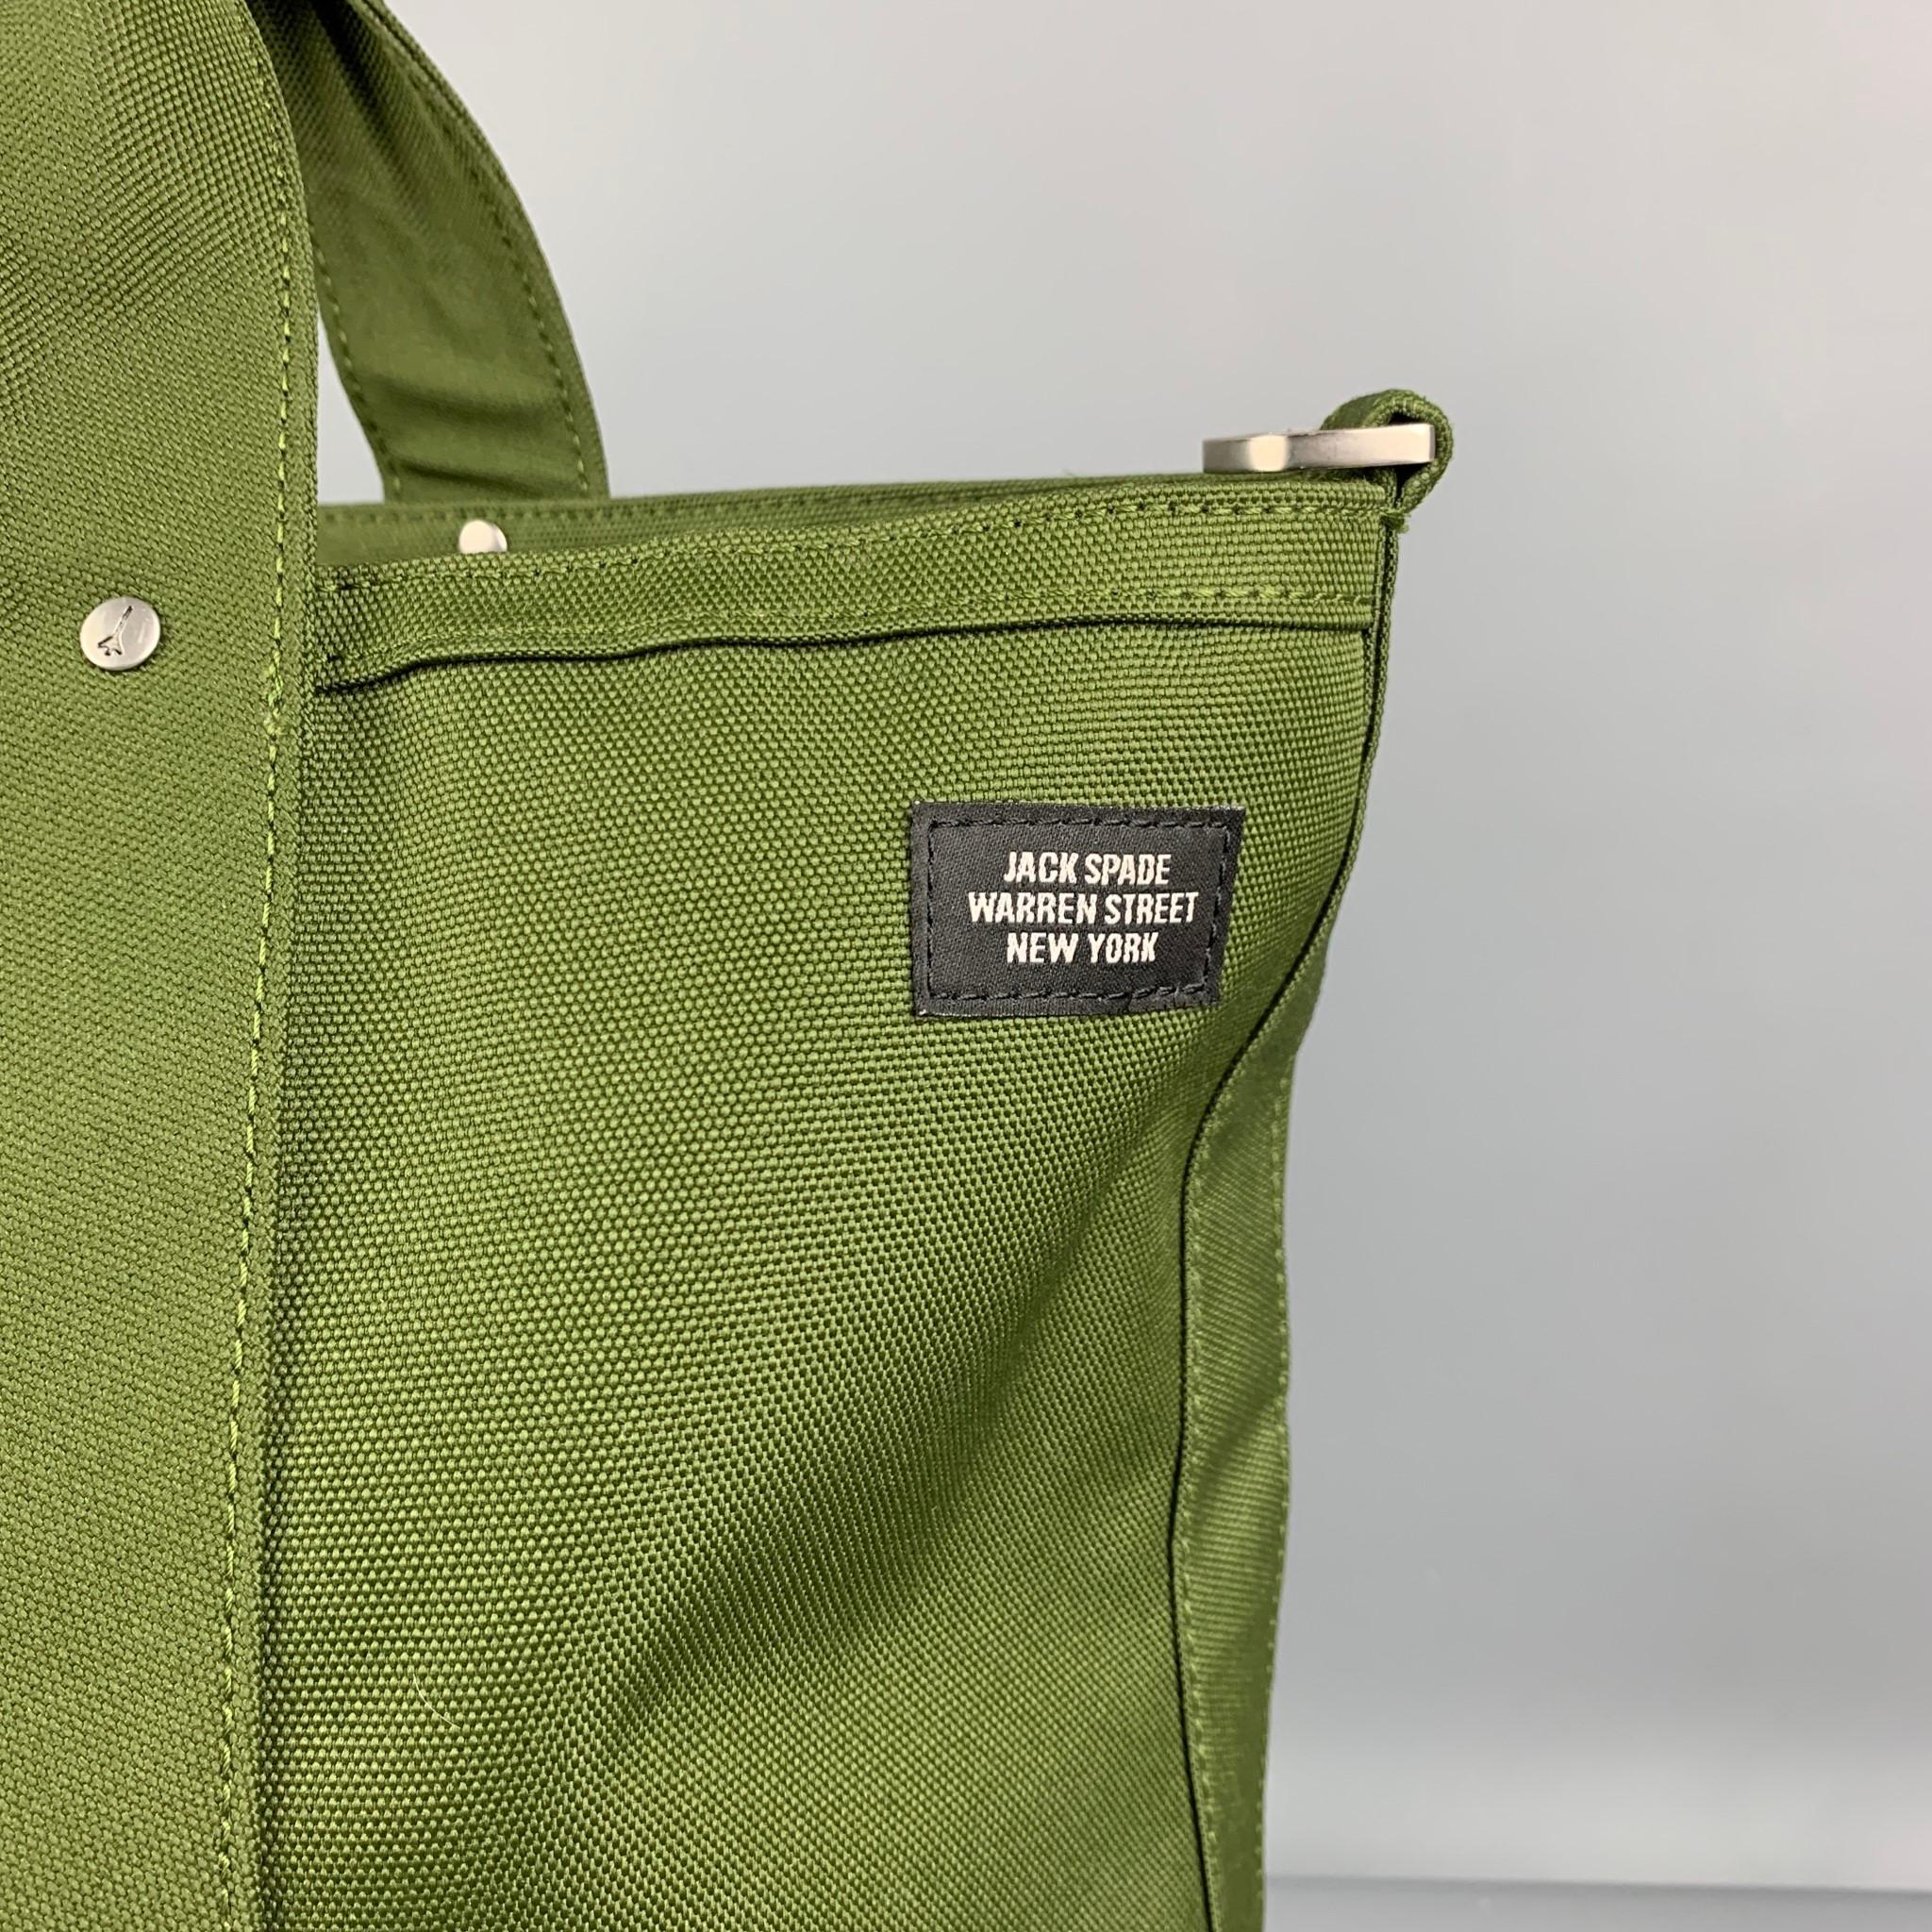 JACK SPADE bag comes in a olive & grey two toned canvas featuring a tote style, top handles, inner slots, and a zip up closure. 

Very Good Pre-Owned Condition. Missing strap. Light marks at bottom.

Measurements:

Length: 15 in.
Width: 6